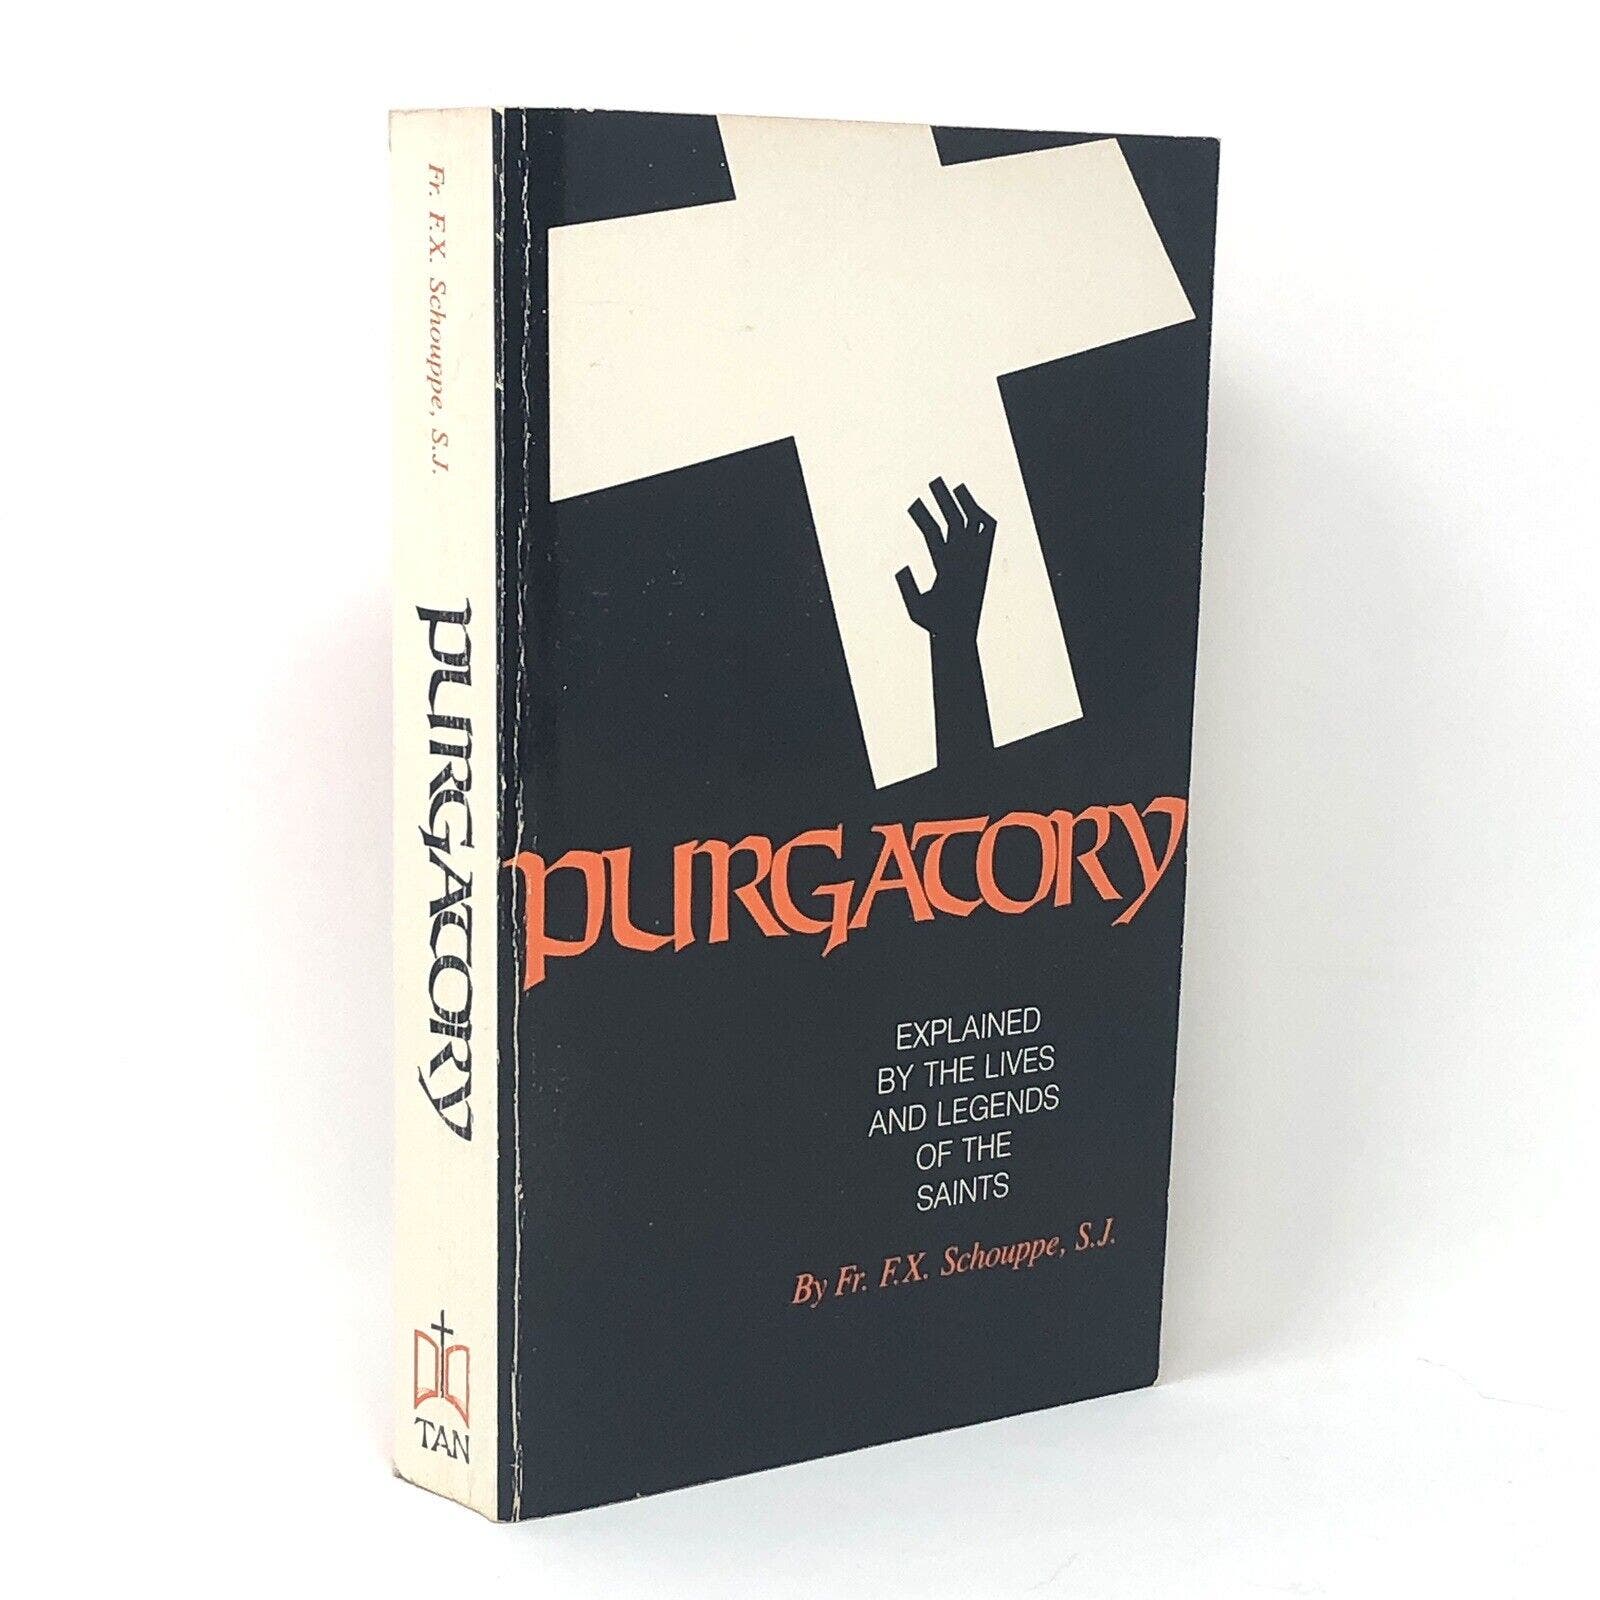 Purgatory Explained by S.J. Fr. F.X. Schouppe TAN Book ~ Mass Market - Uncle Buddy's Beard & Used Books